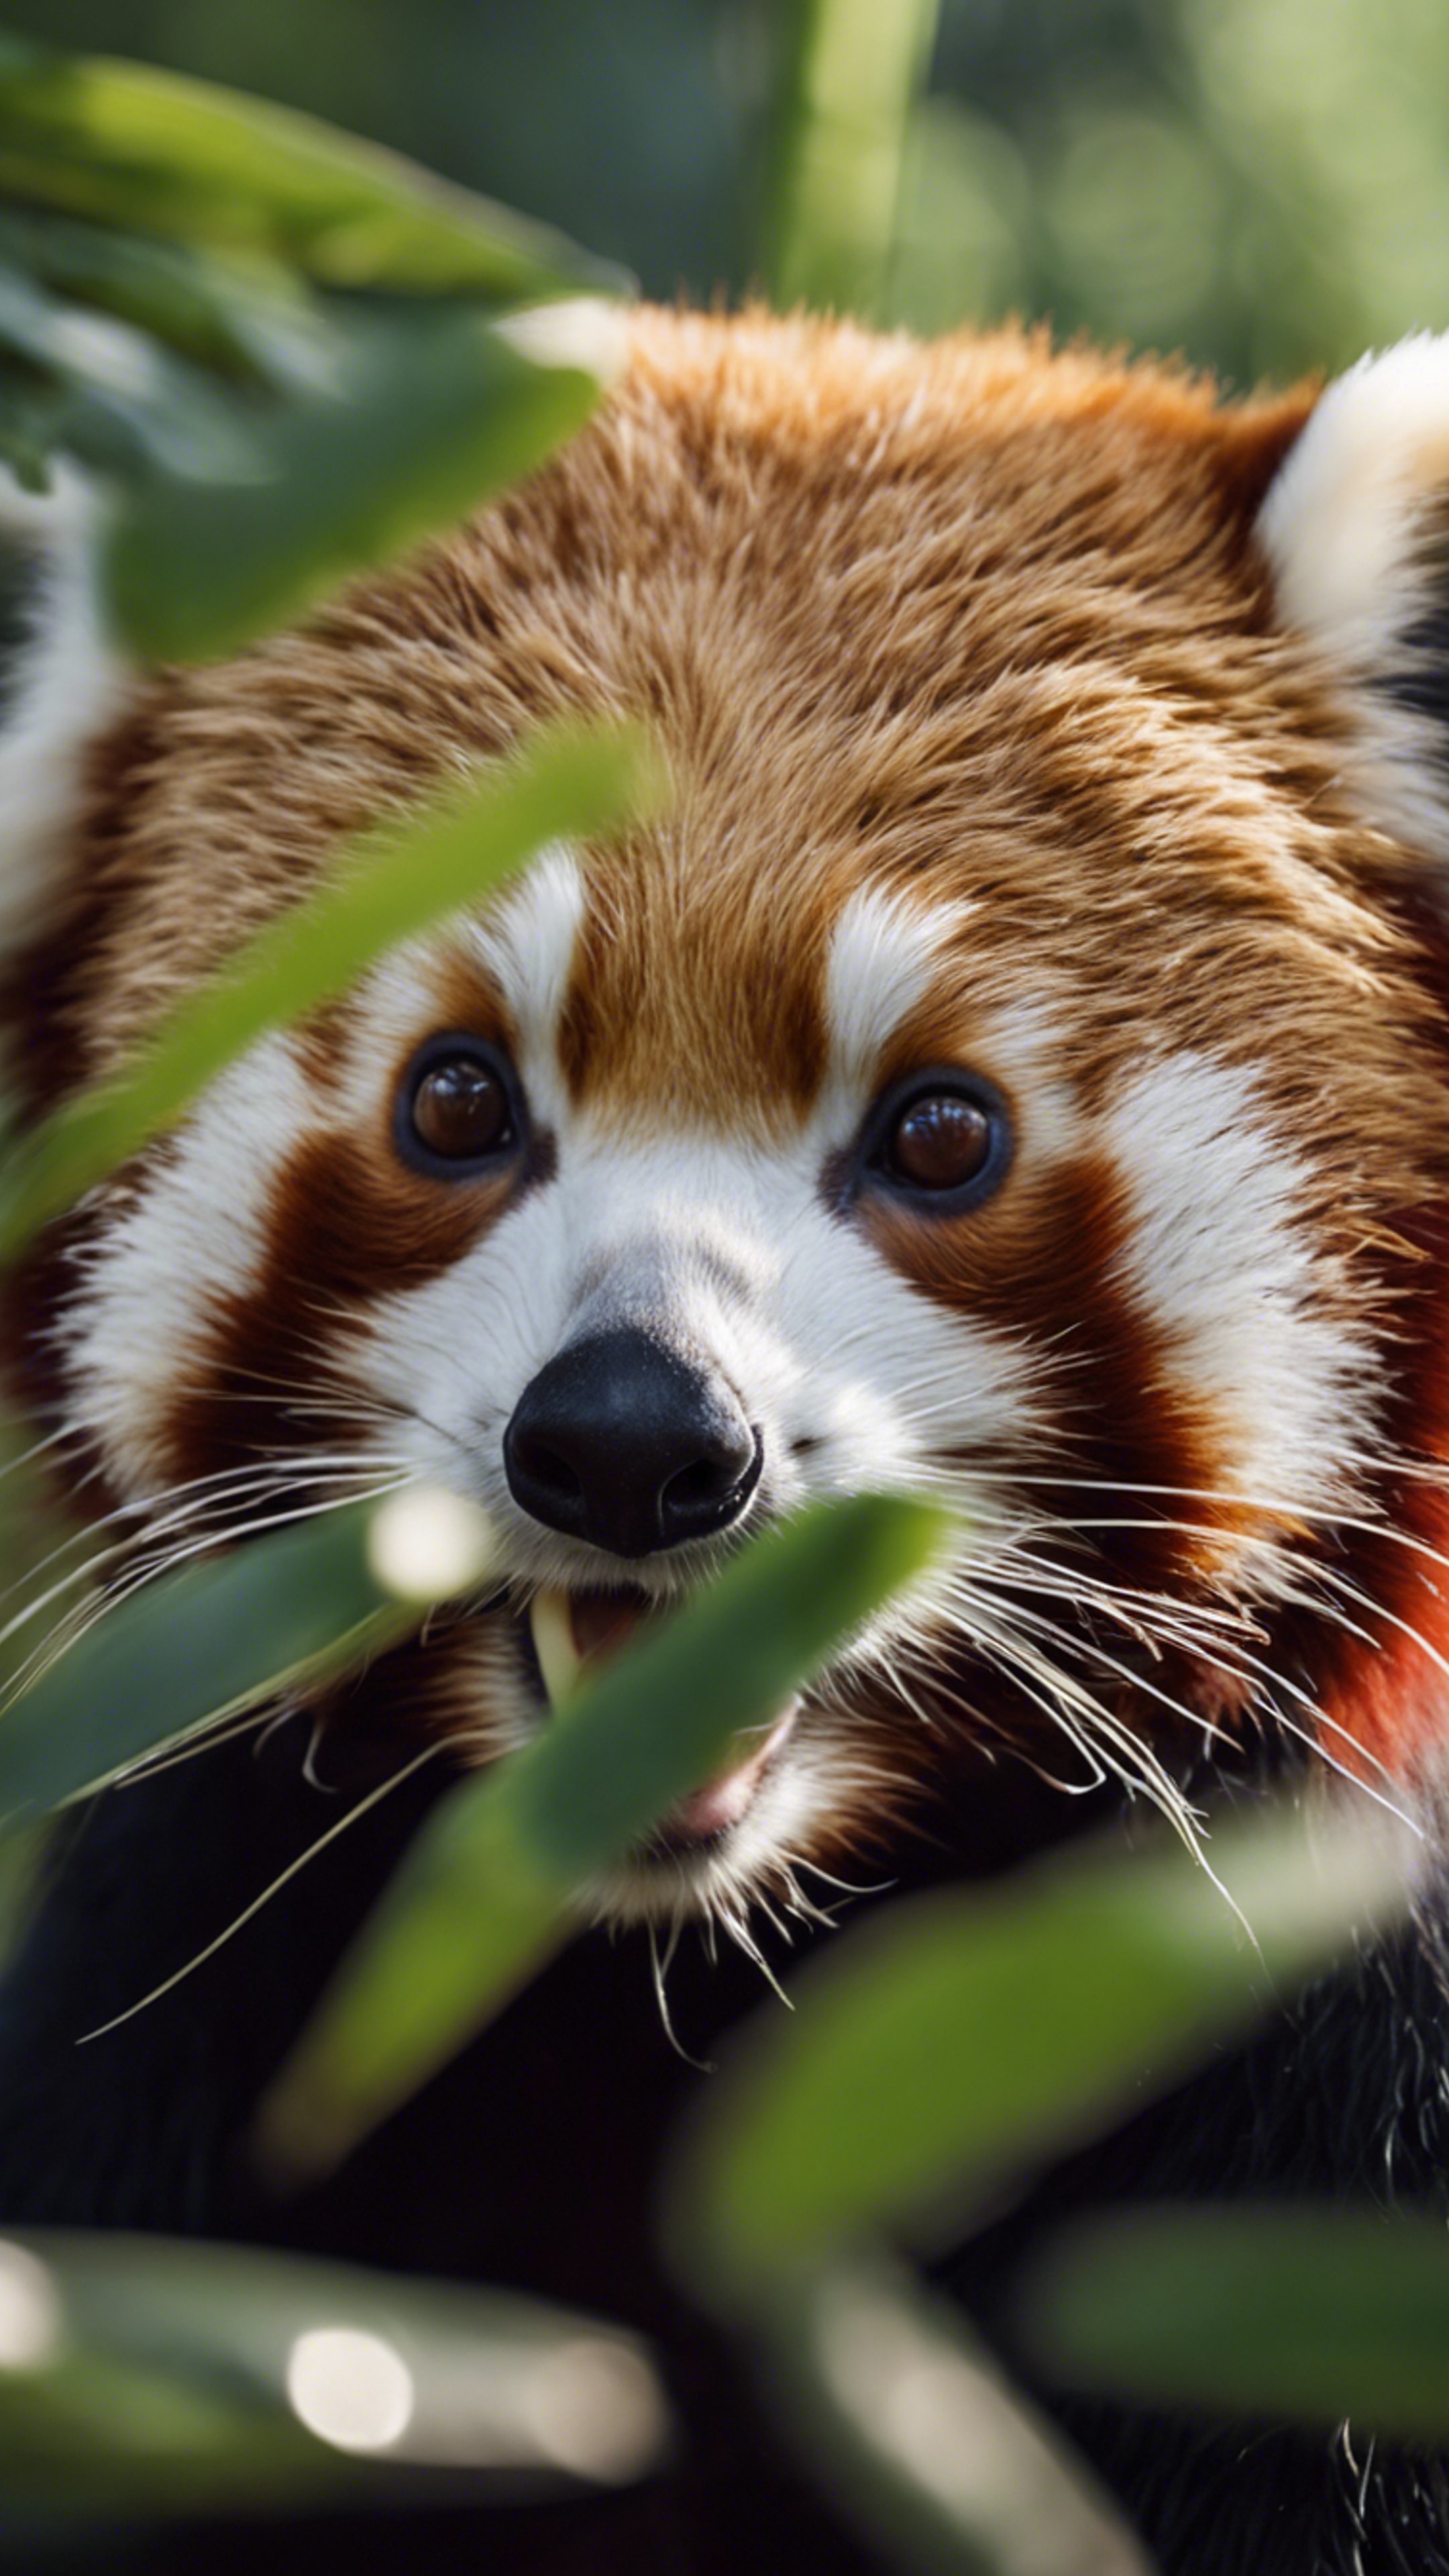 A close-up of a red panda munching on bamboo leaves Fond d'écran[20c4a1c4fccc4fa88325]